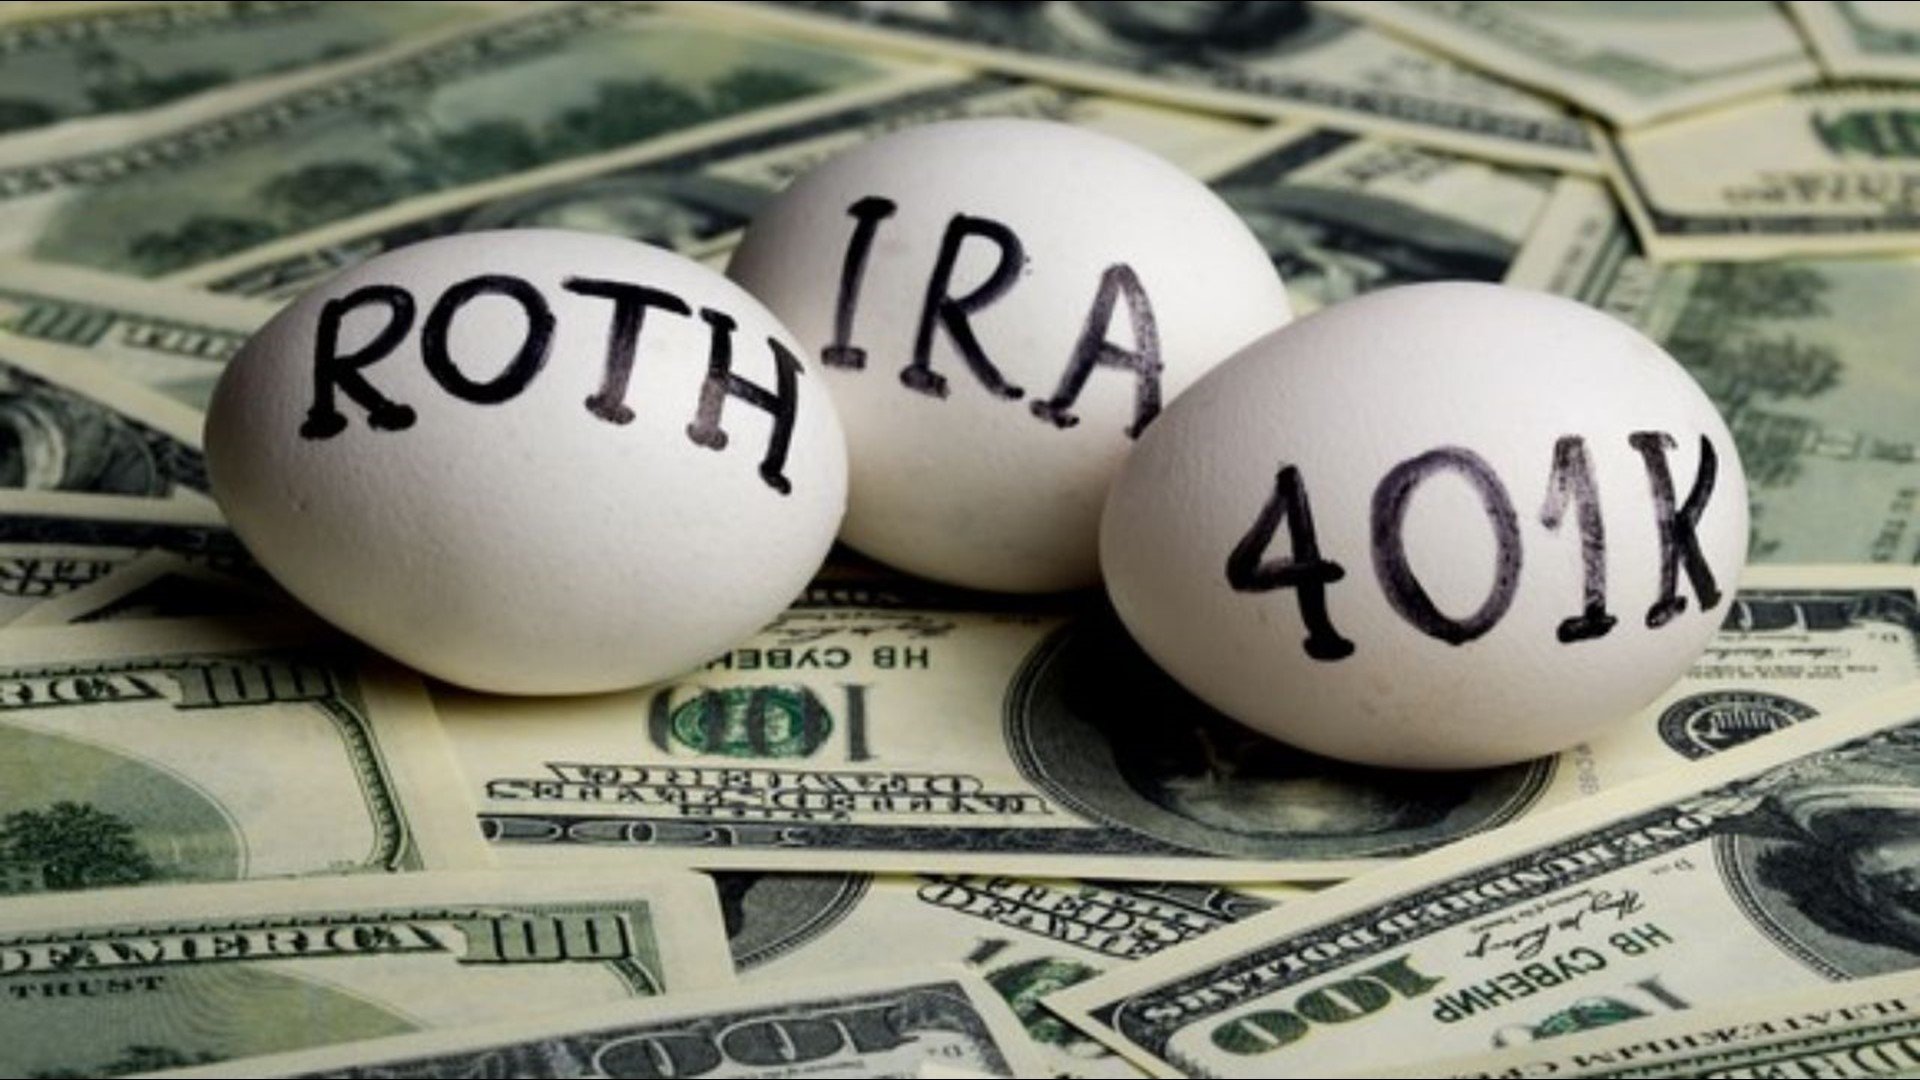 Roth 401(k) vs. Roth IRA: Which is better for you?